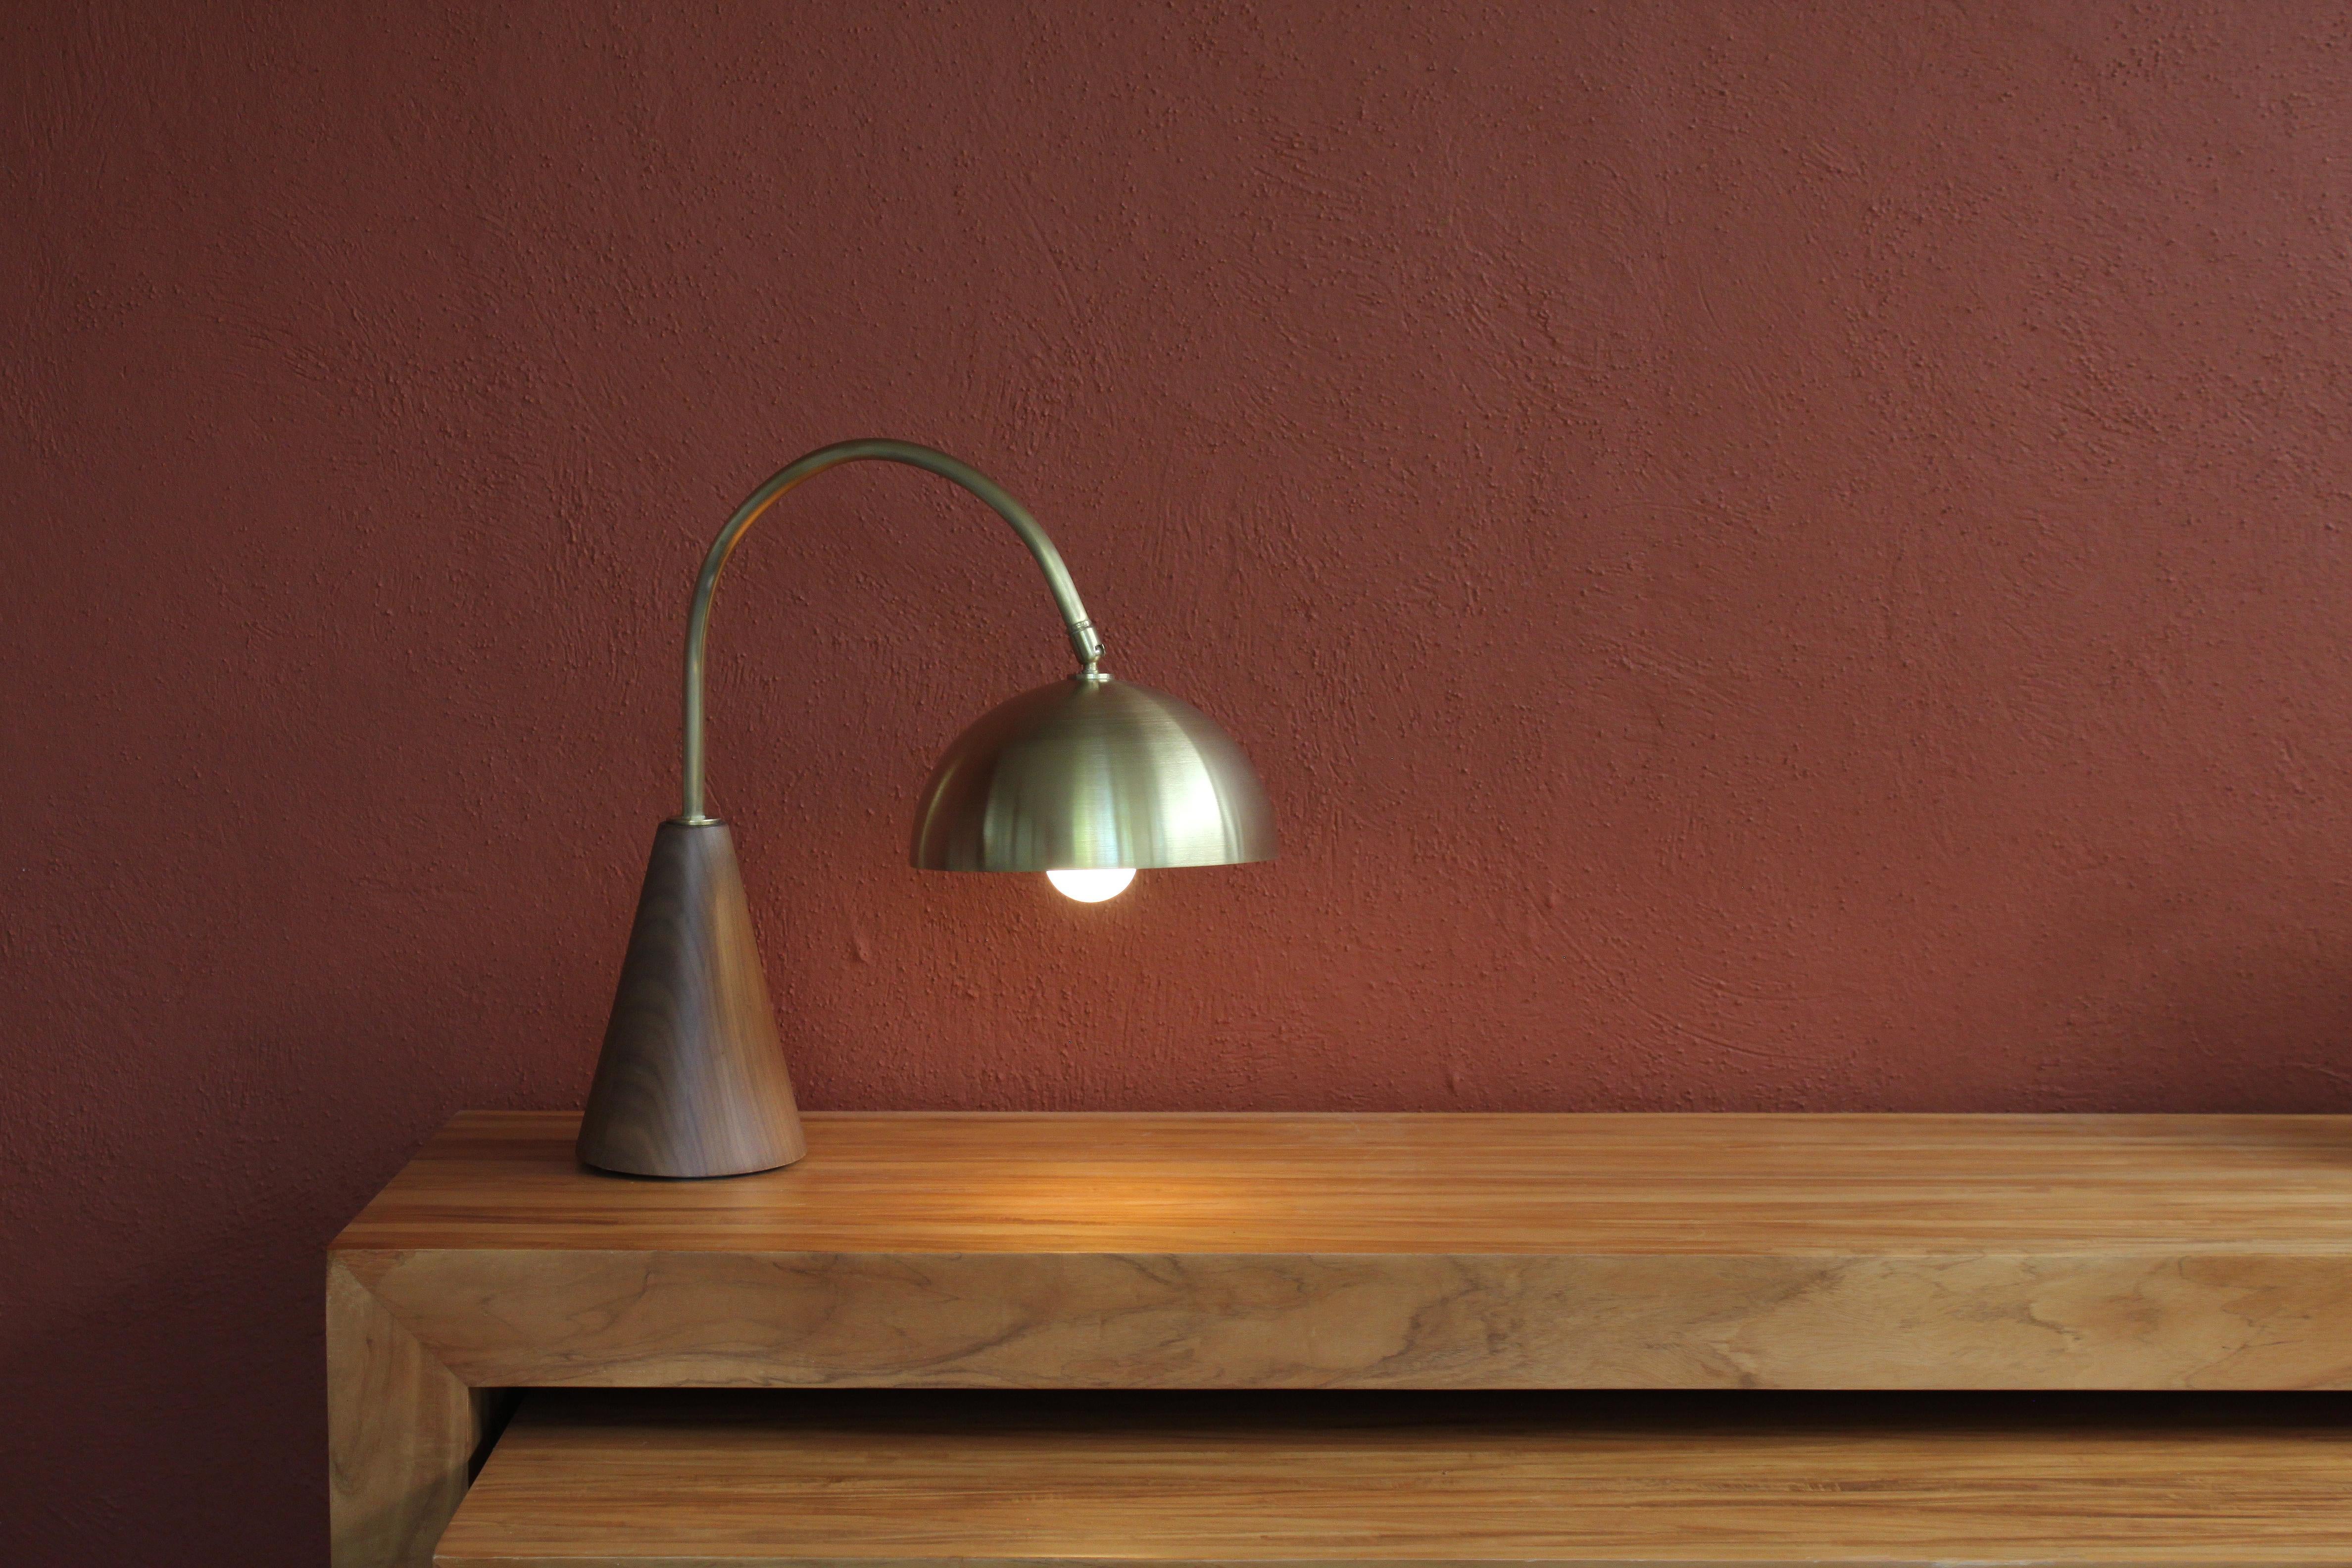 Mexican Arco De Mesa Table Lamp by Maria Beckmann, Represented by Tuleste Factory